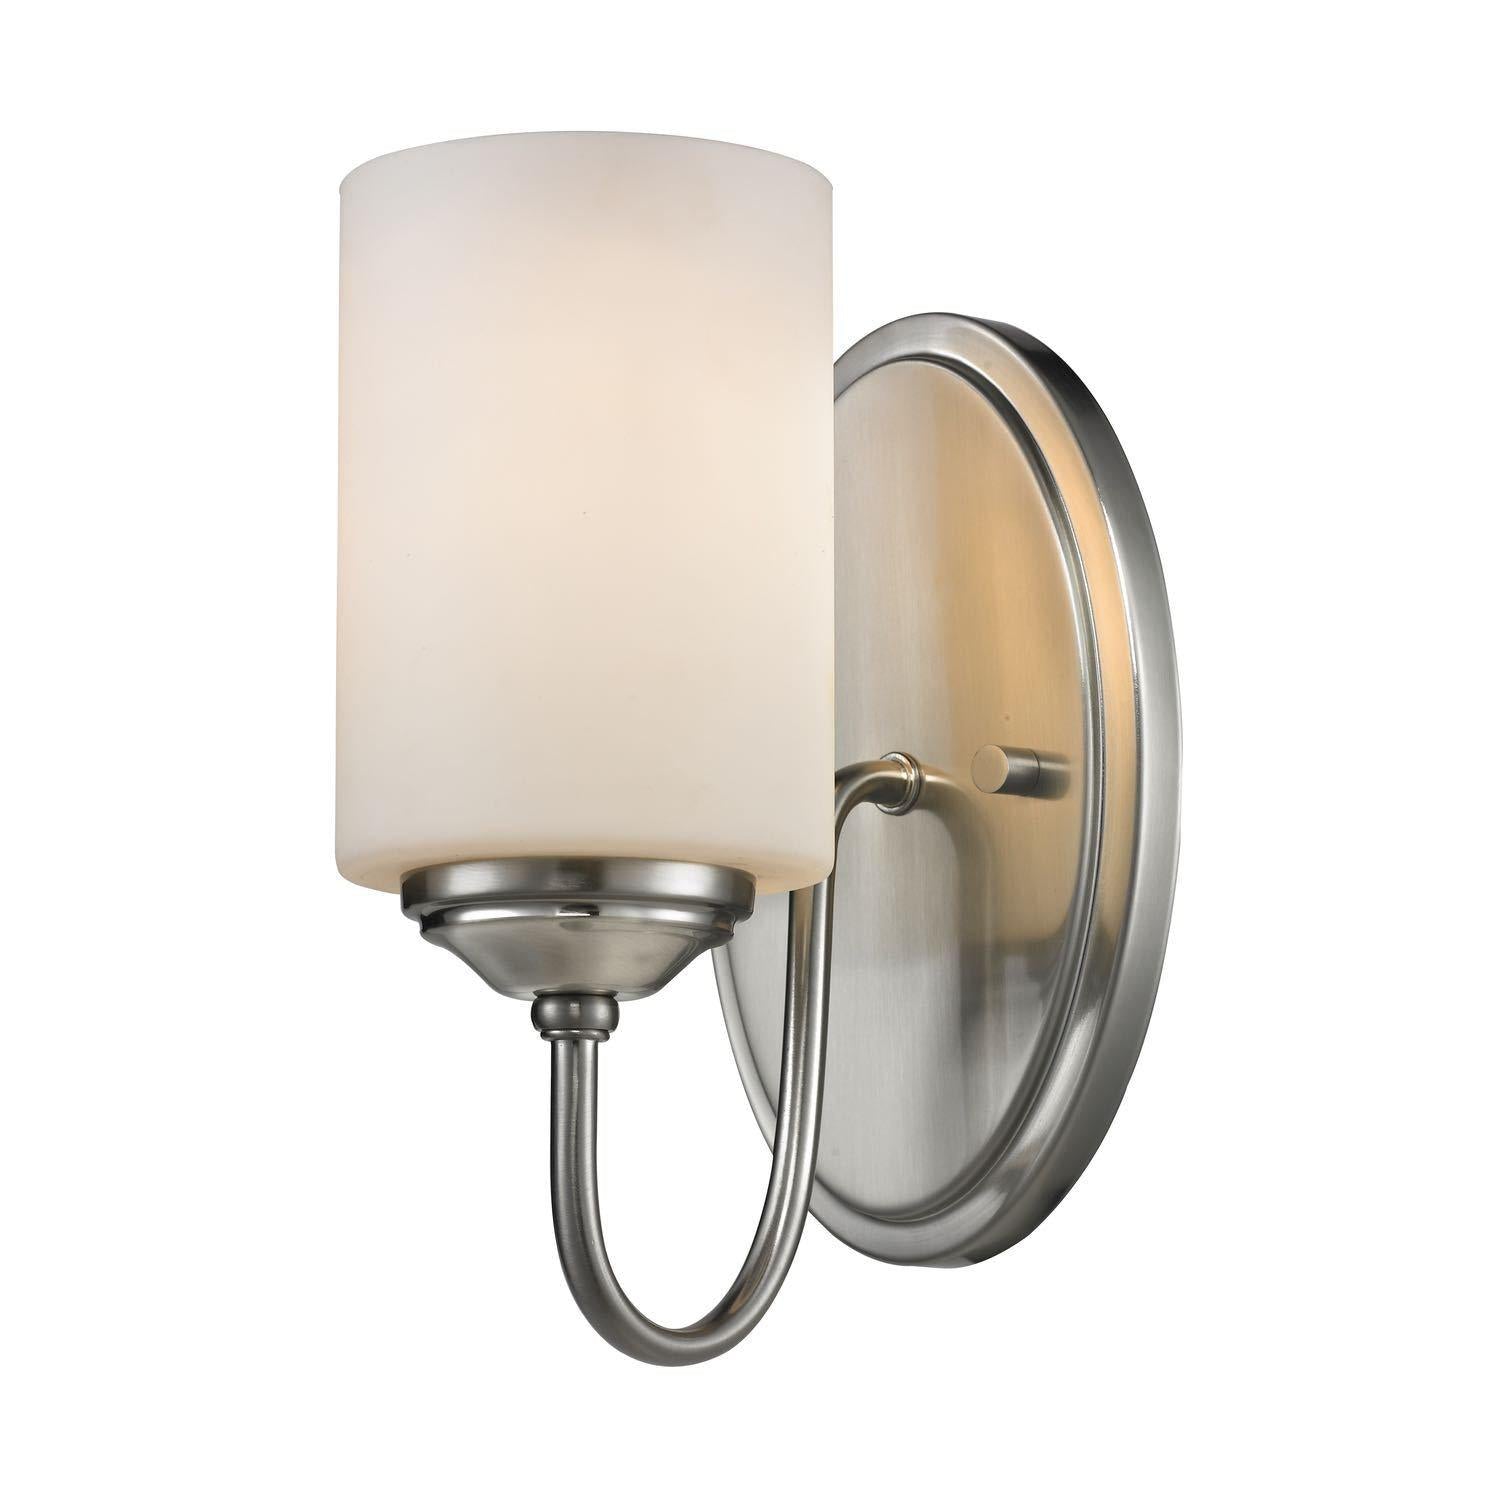 Cardinal Wall Sconce Brushed Nickel